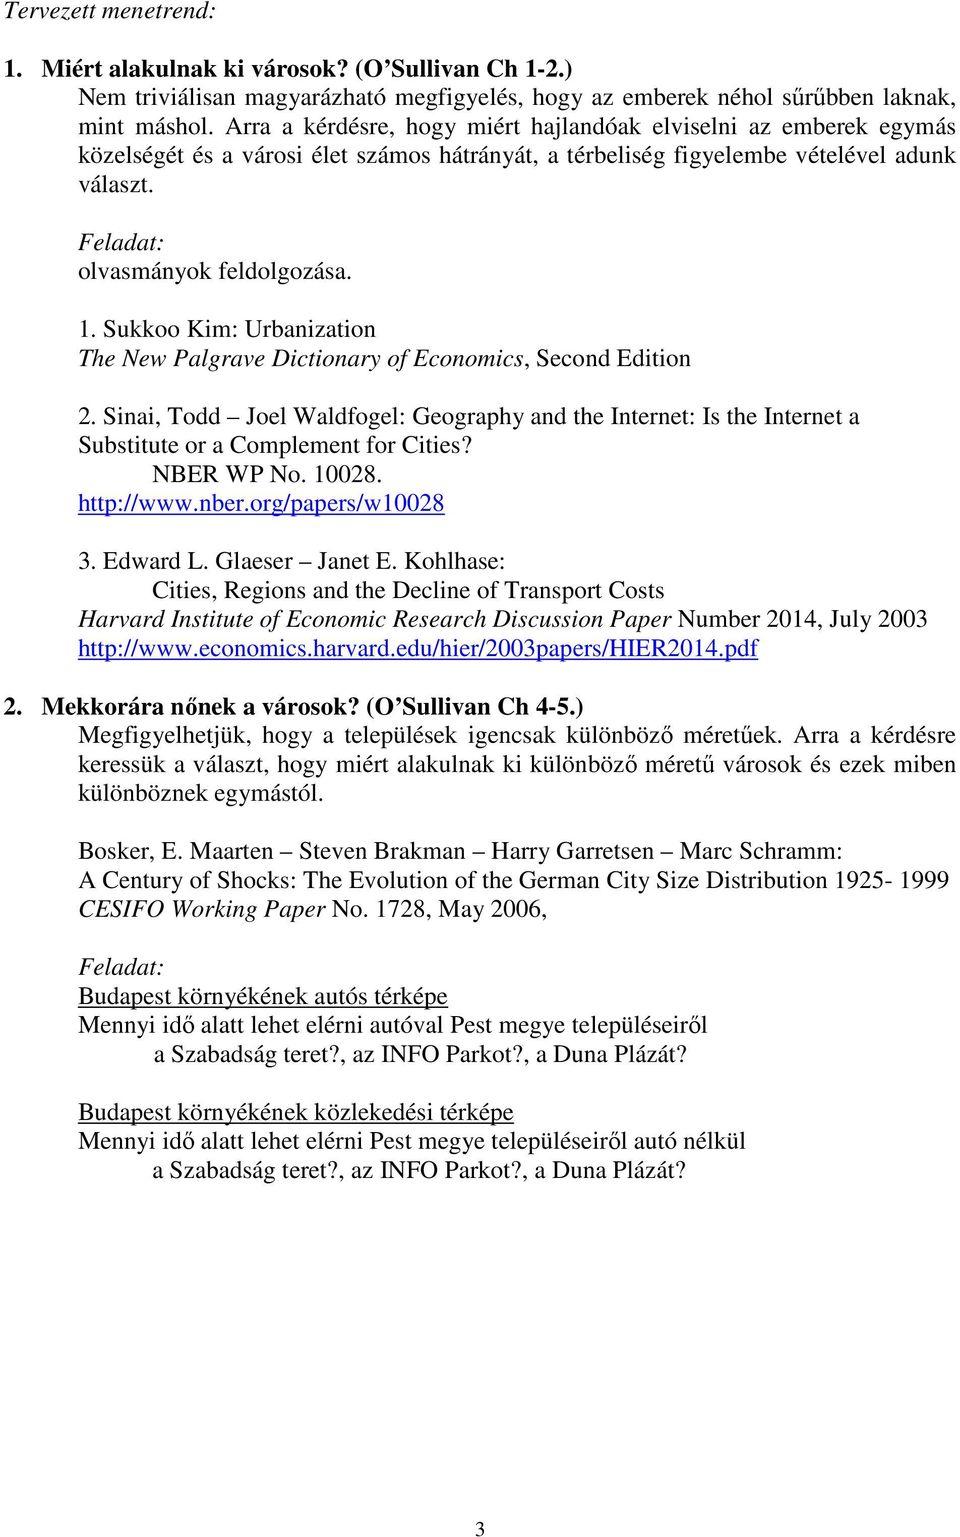 Sukkoo Kim: Urbanization The New Palgrave Dictionary of Economics, Second Edition 2. Sinai, Todd Joel Waldfogel: Geography and the Internet: Is the Internet a Substitute or a Complement for Cities?